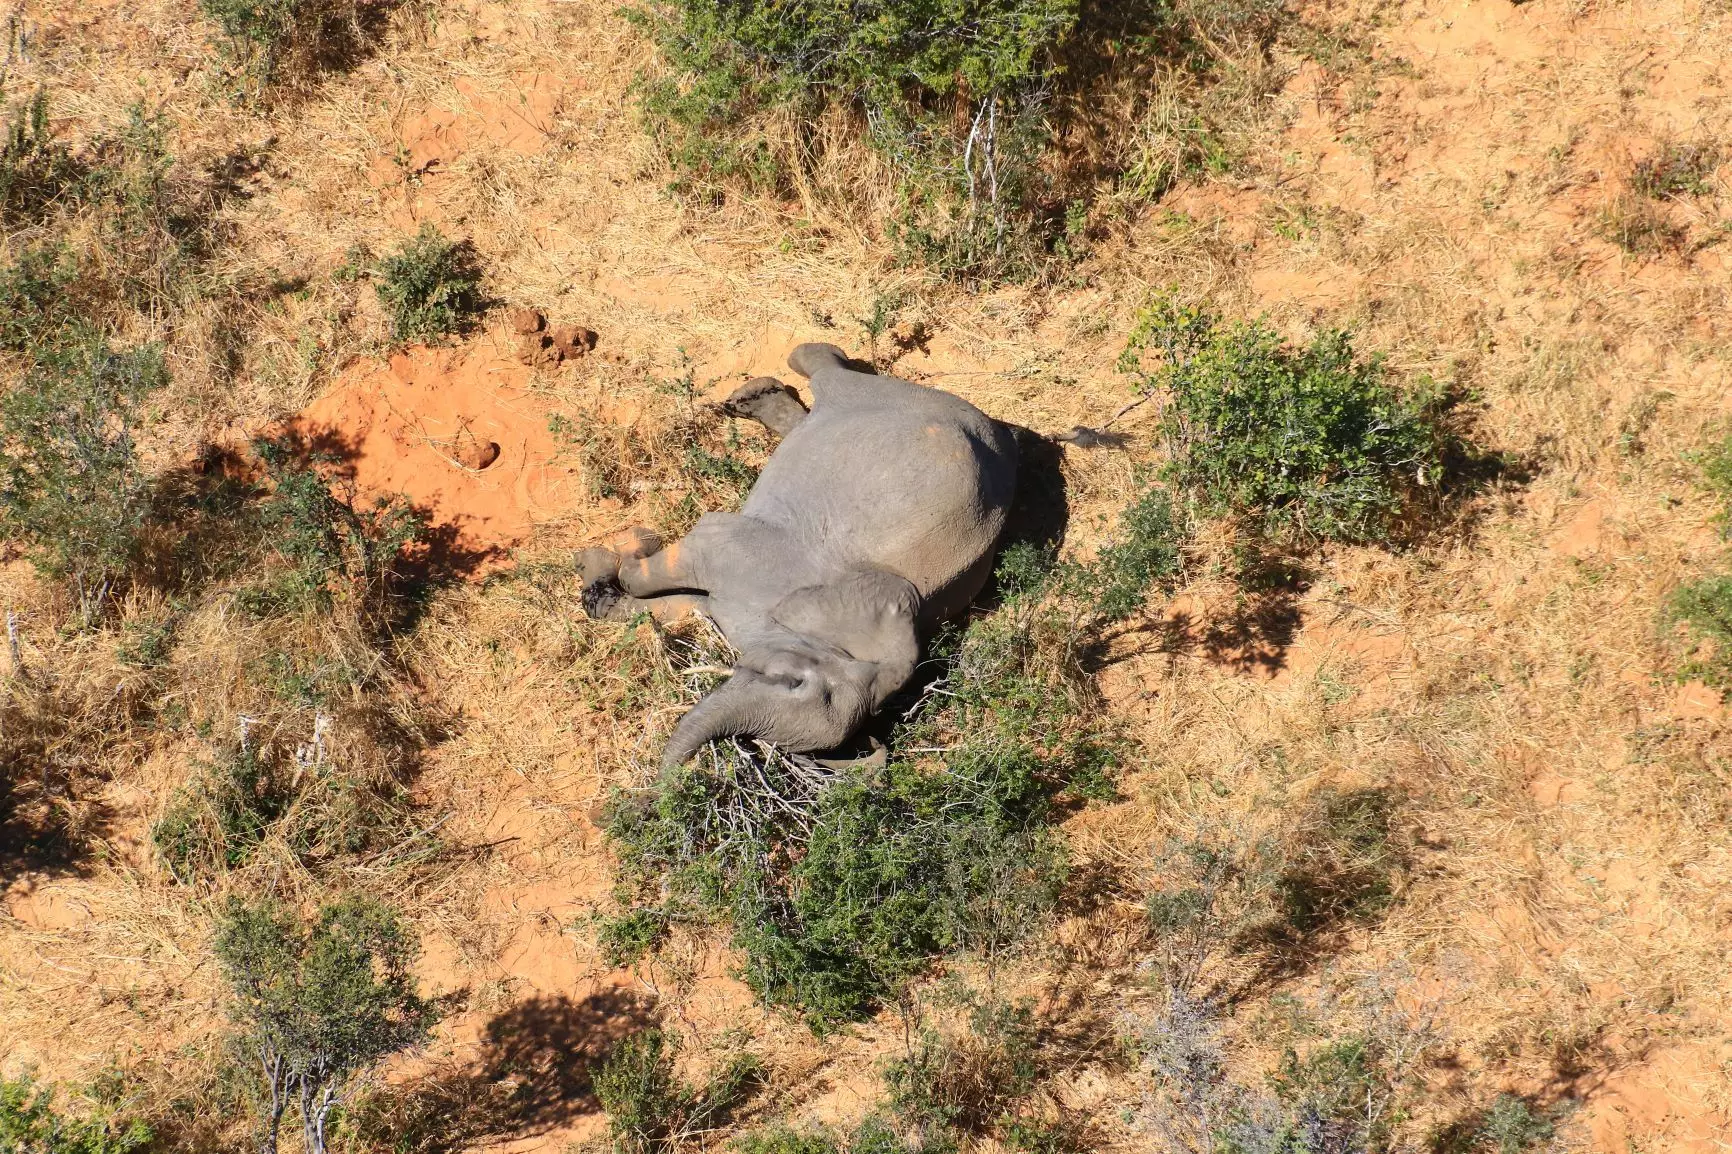 An investigation has been launched into the cause of death for 11 elephants in Zimbabwe.